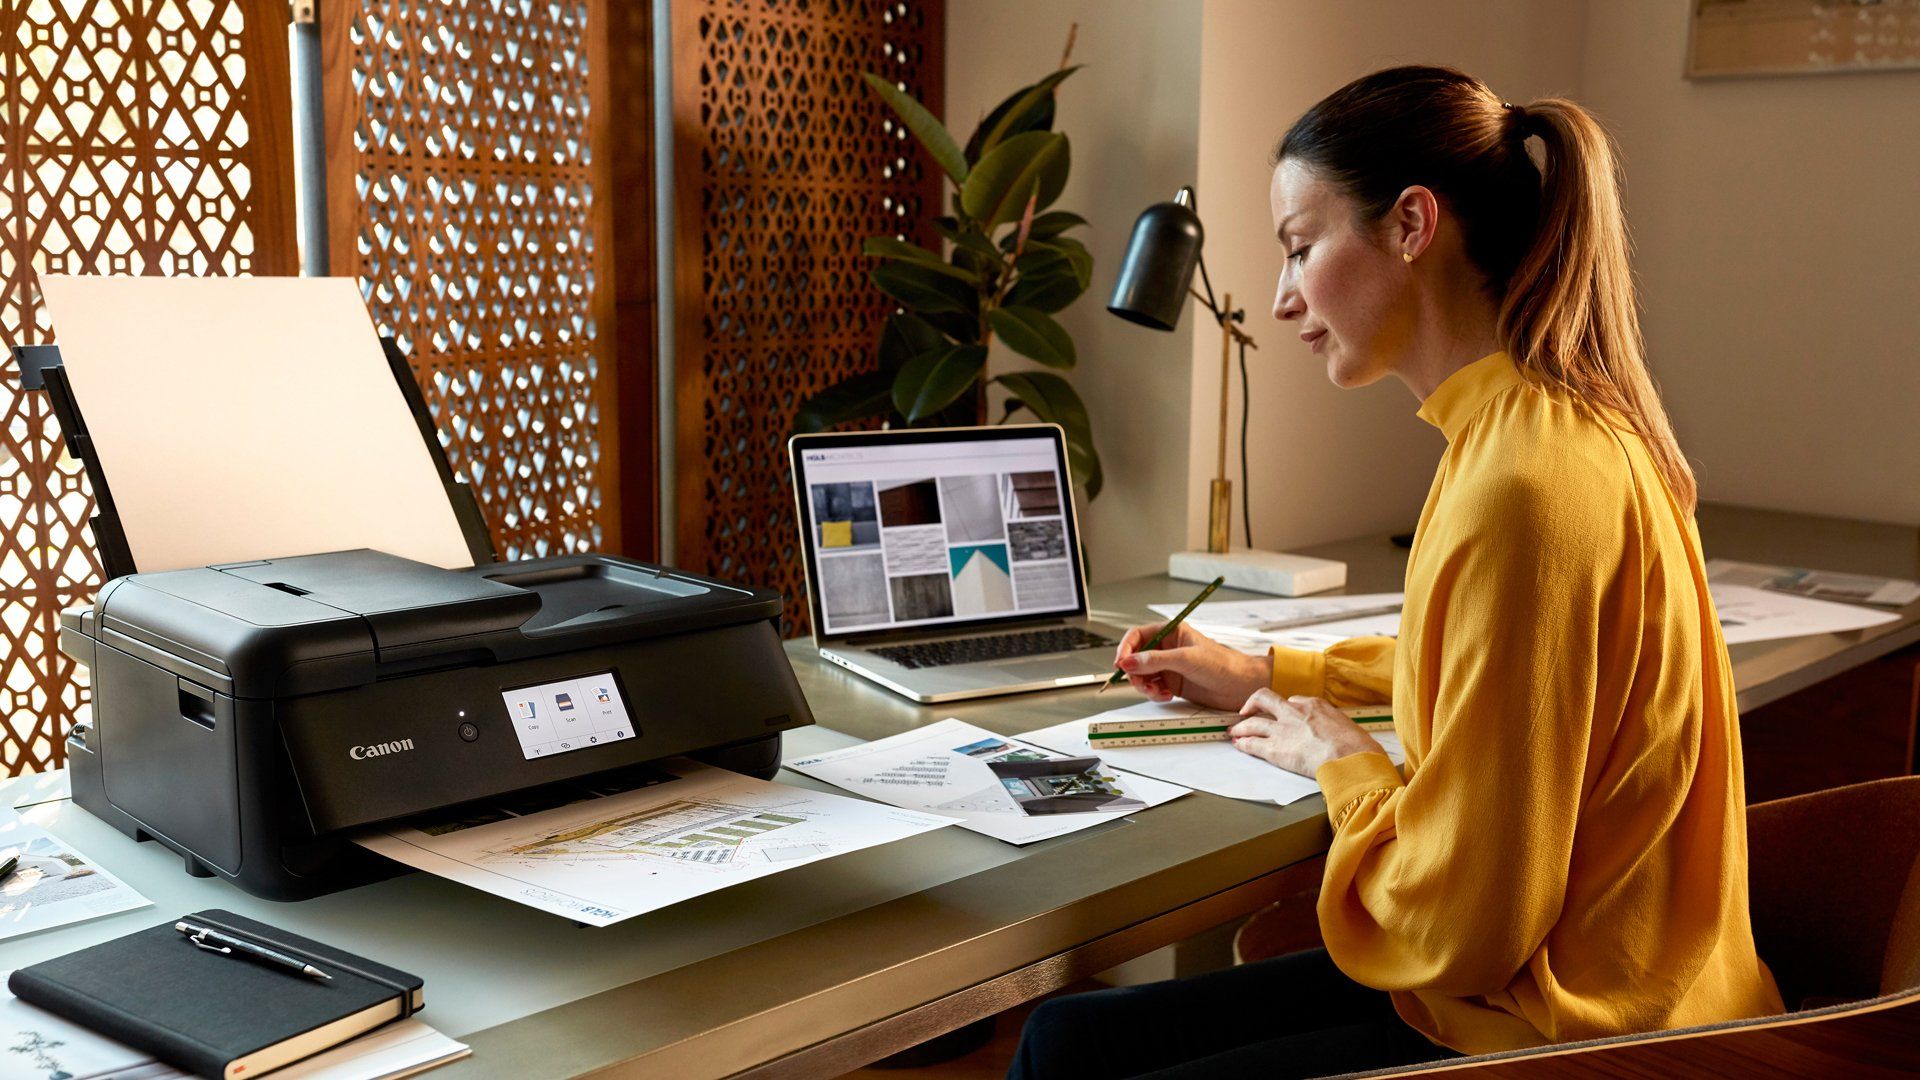 A female business owner prints with PIXMA TS9550 while drawing and using a ruler at her desk.